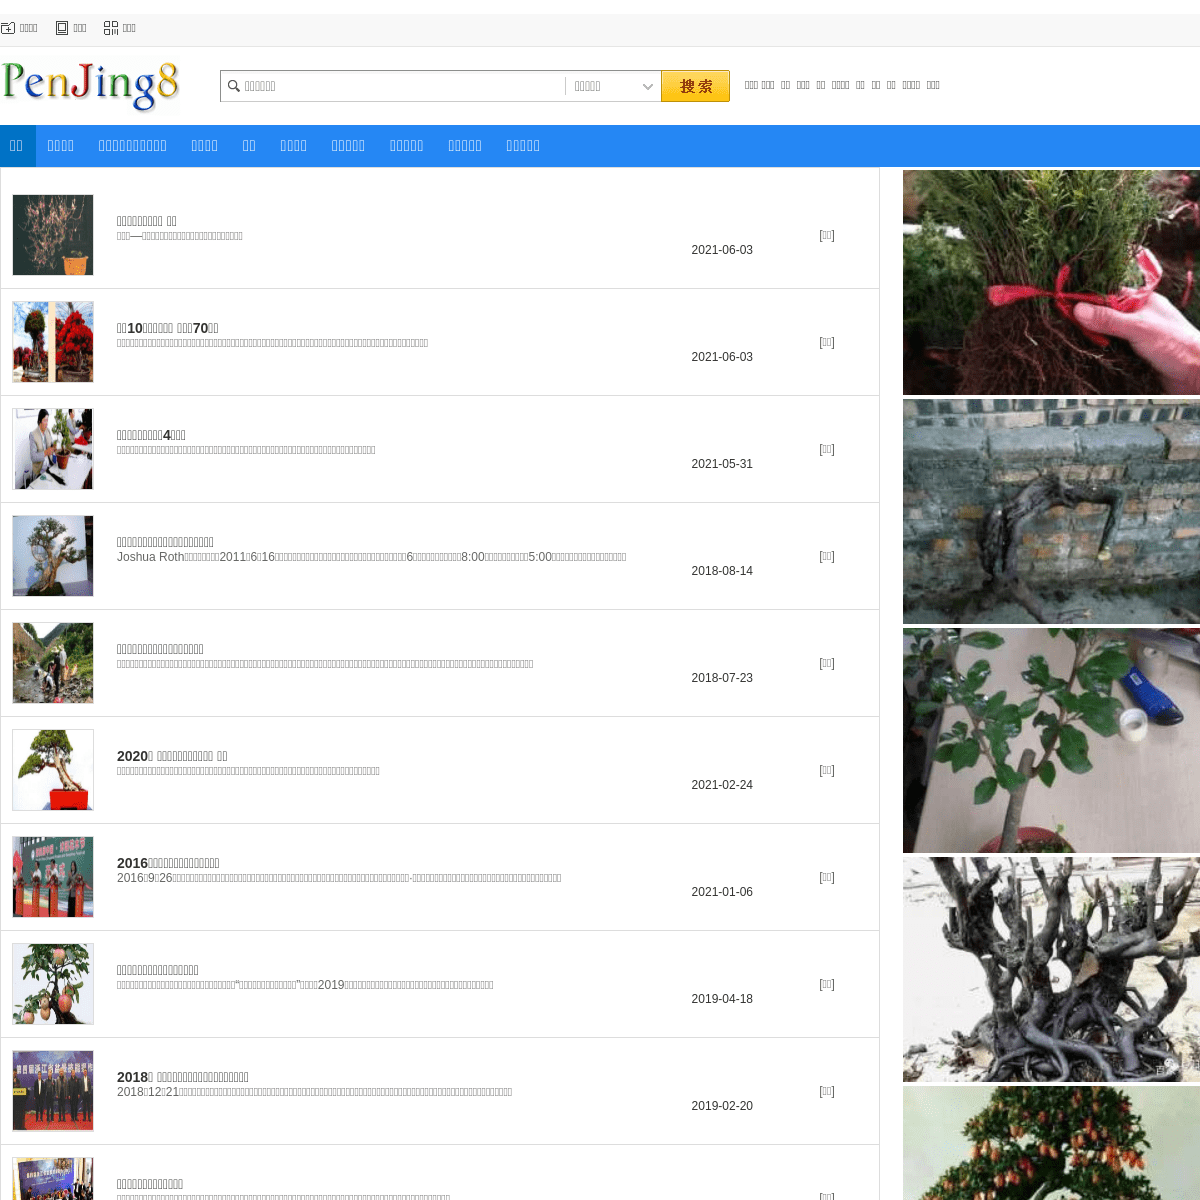 A complete backup of https://penjing8.com